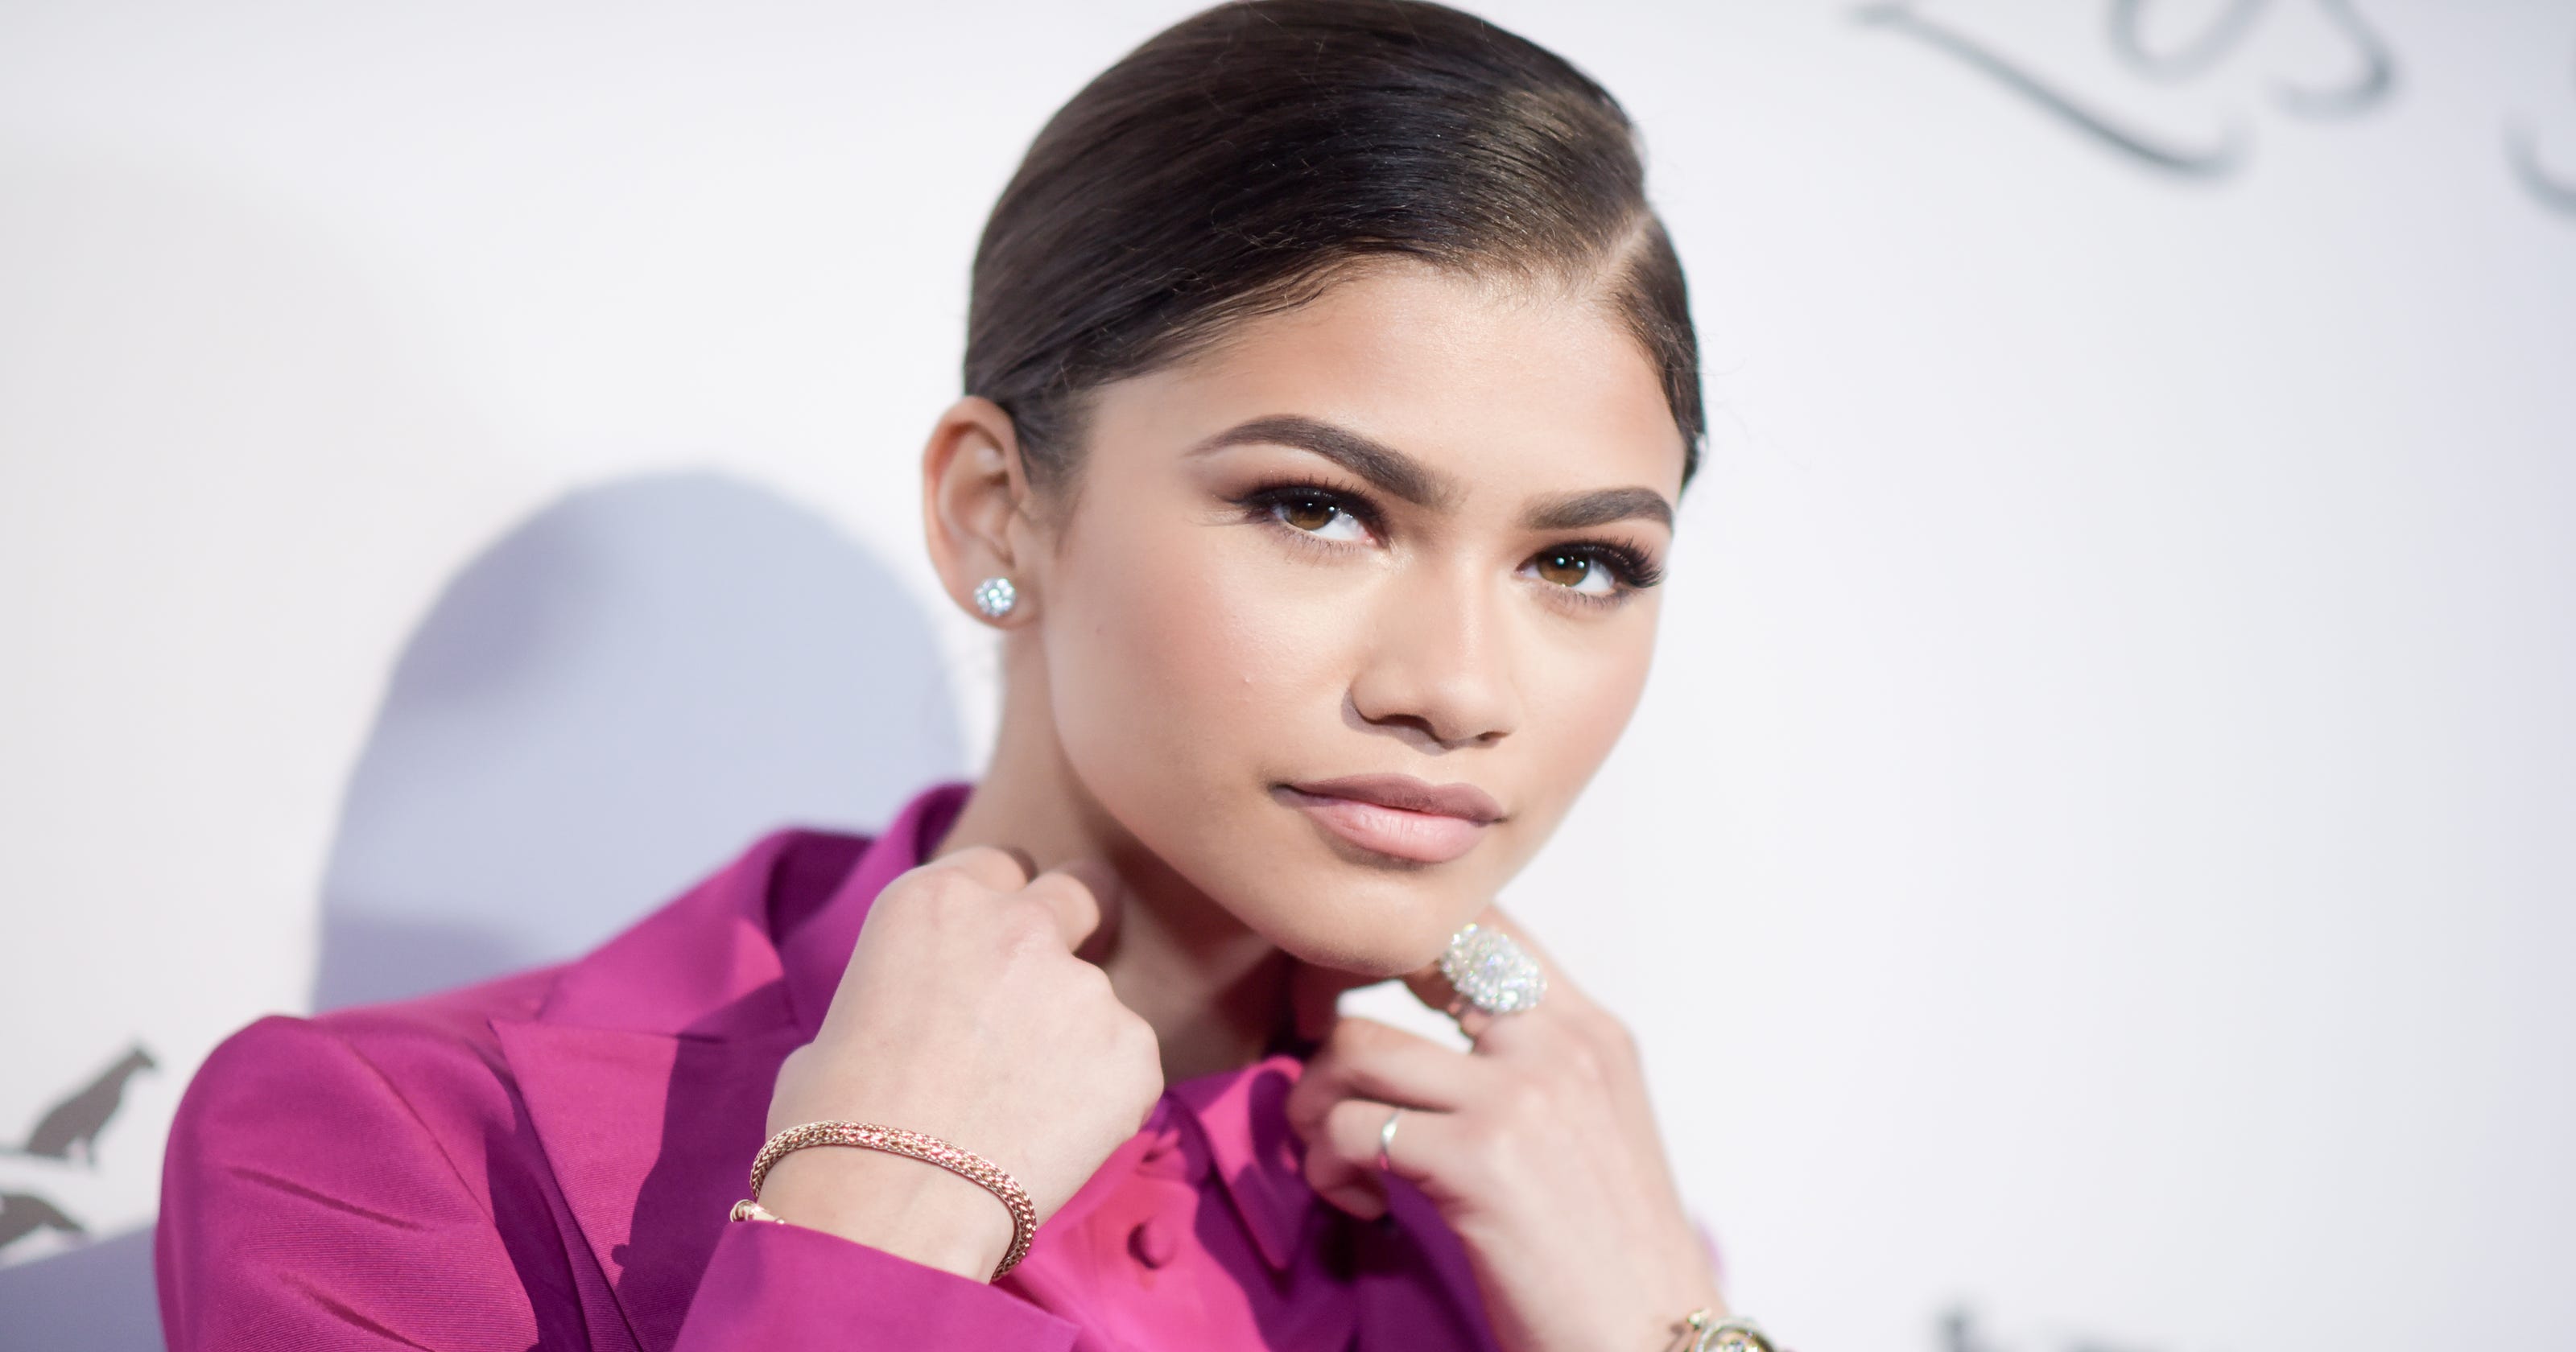 Zendaya on her one condition for returning to Disney: I needed 'more power'